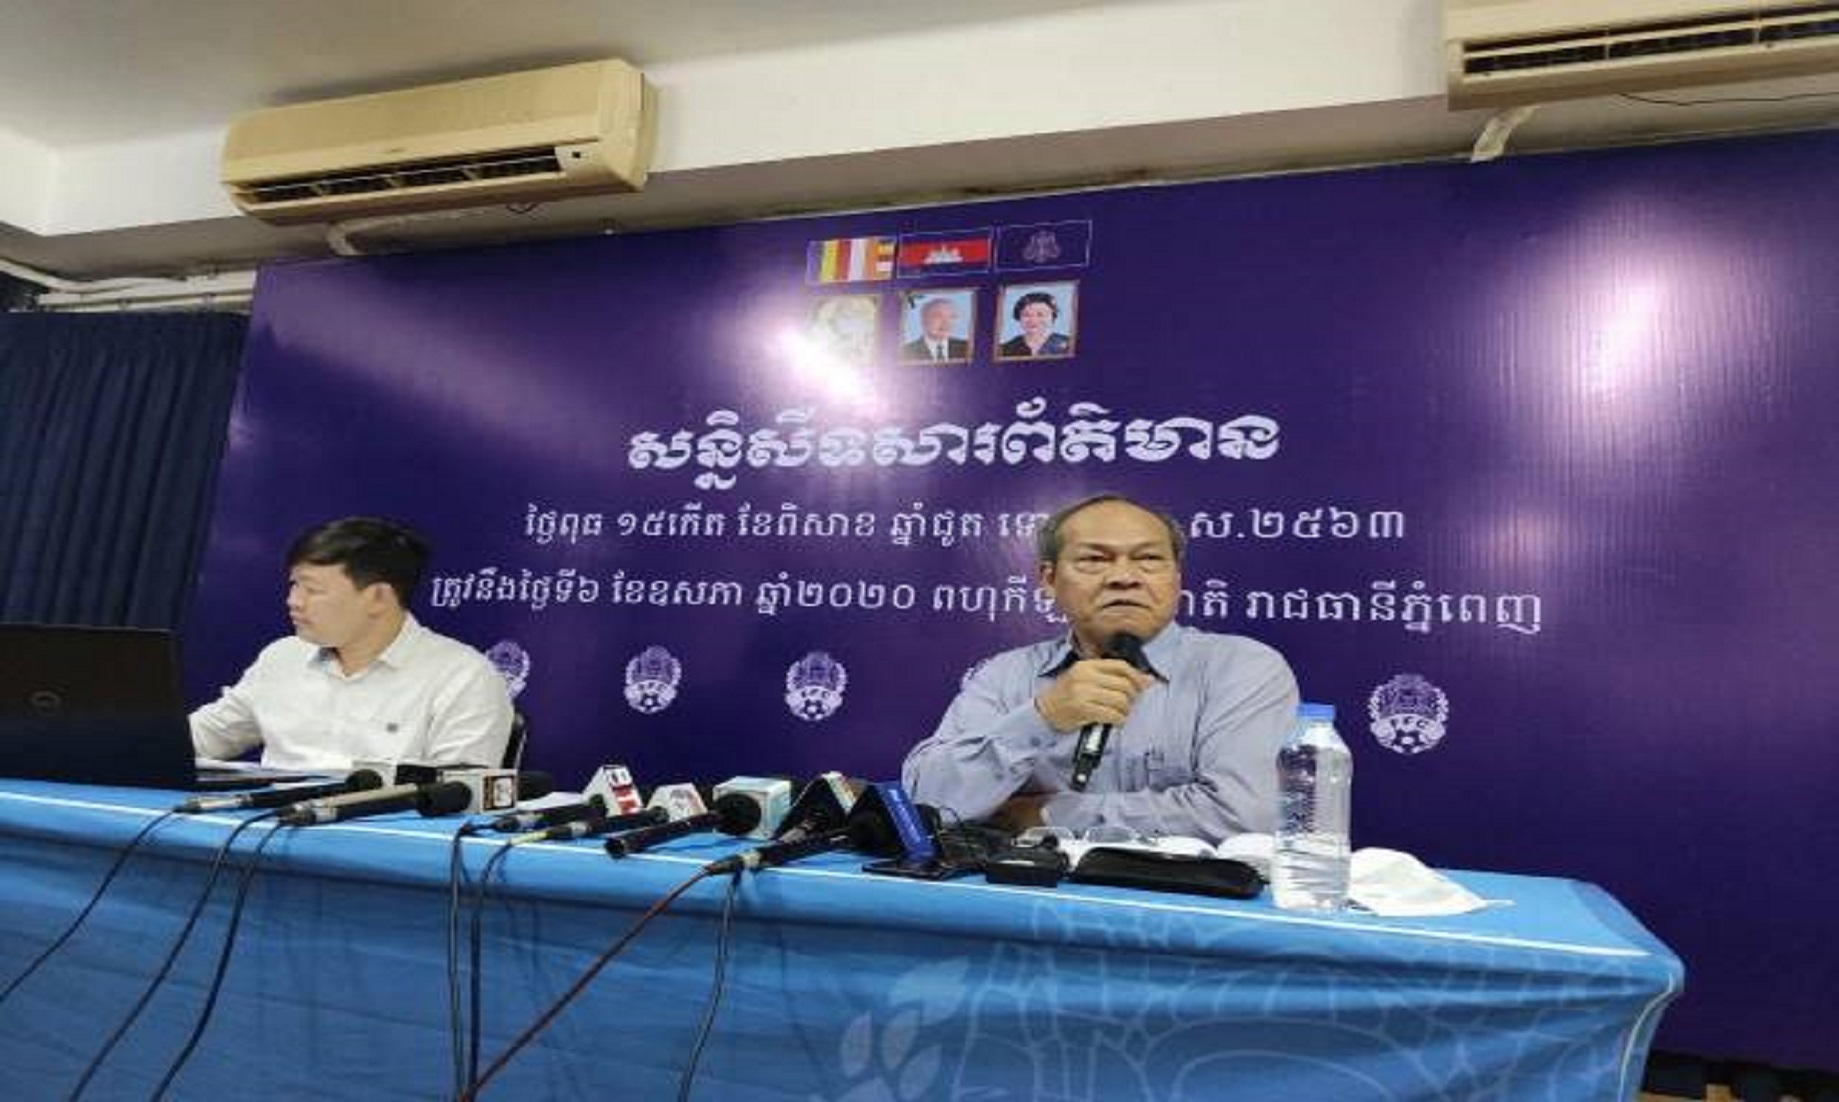 Cambodia’s Football Federation Bans Senior Officials Over Fund Embezzlement